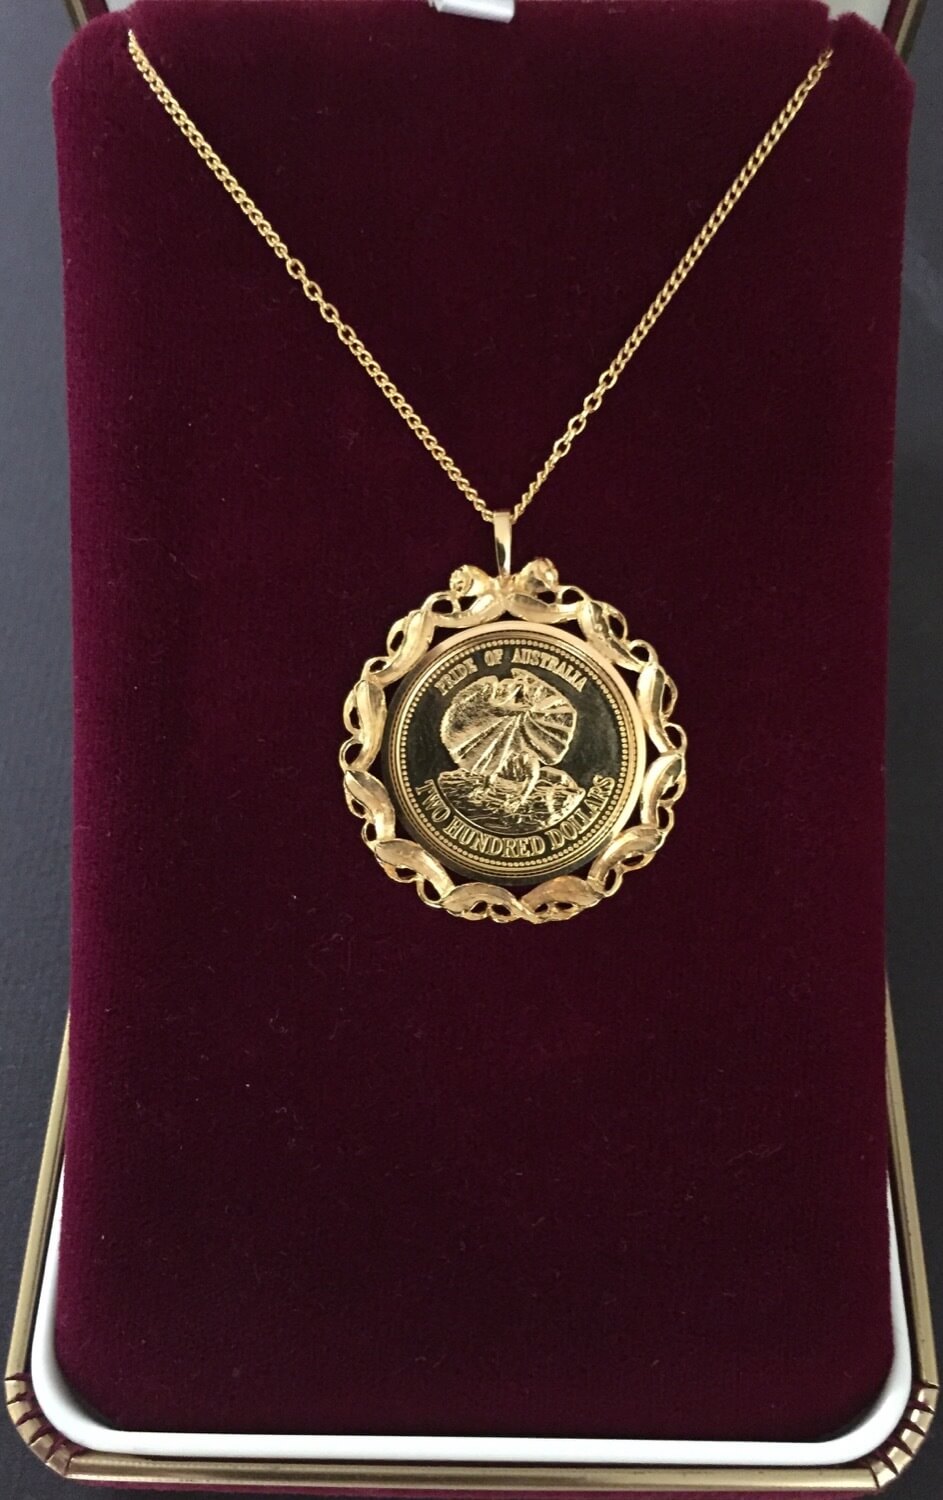 1989 Two Hundred Dollar Gold Proof Brilliant Coin in Pendant - Frill Necked Lizard  product image